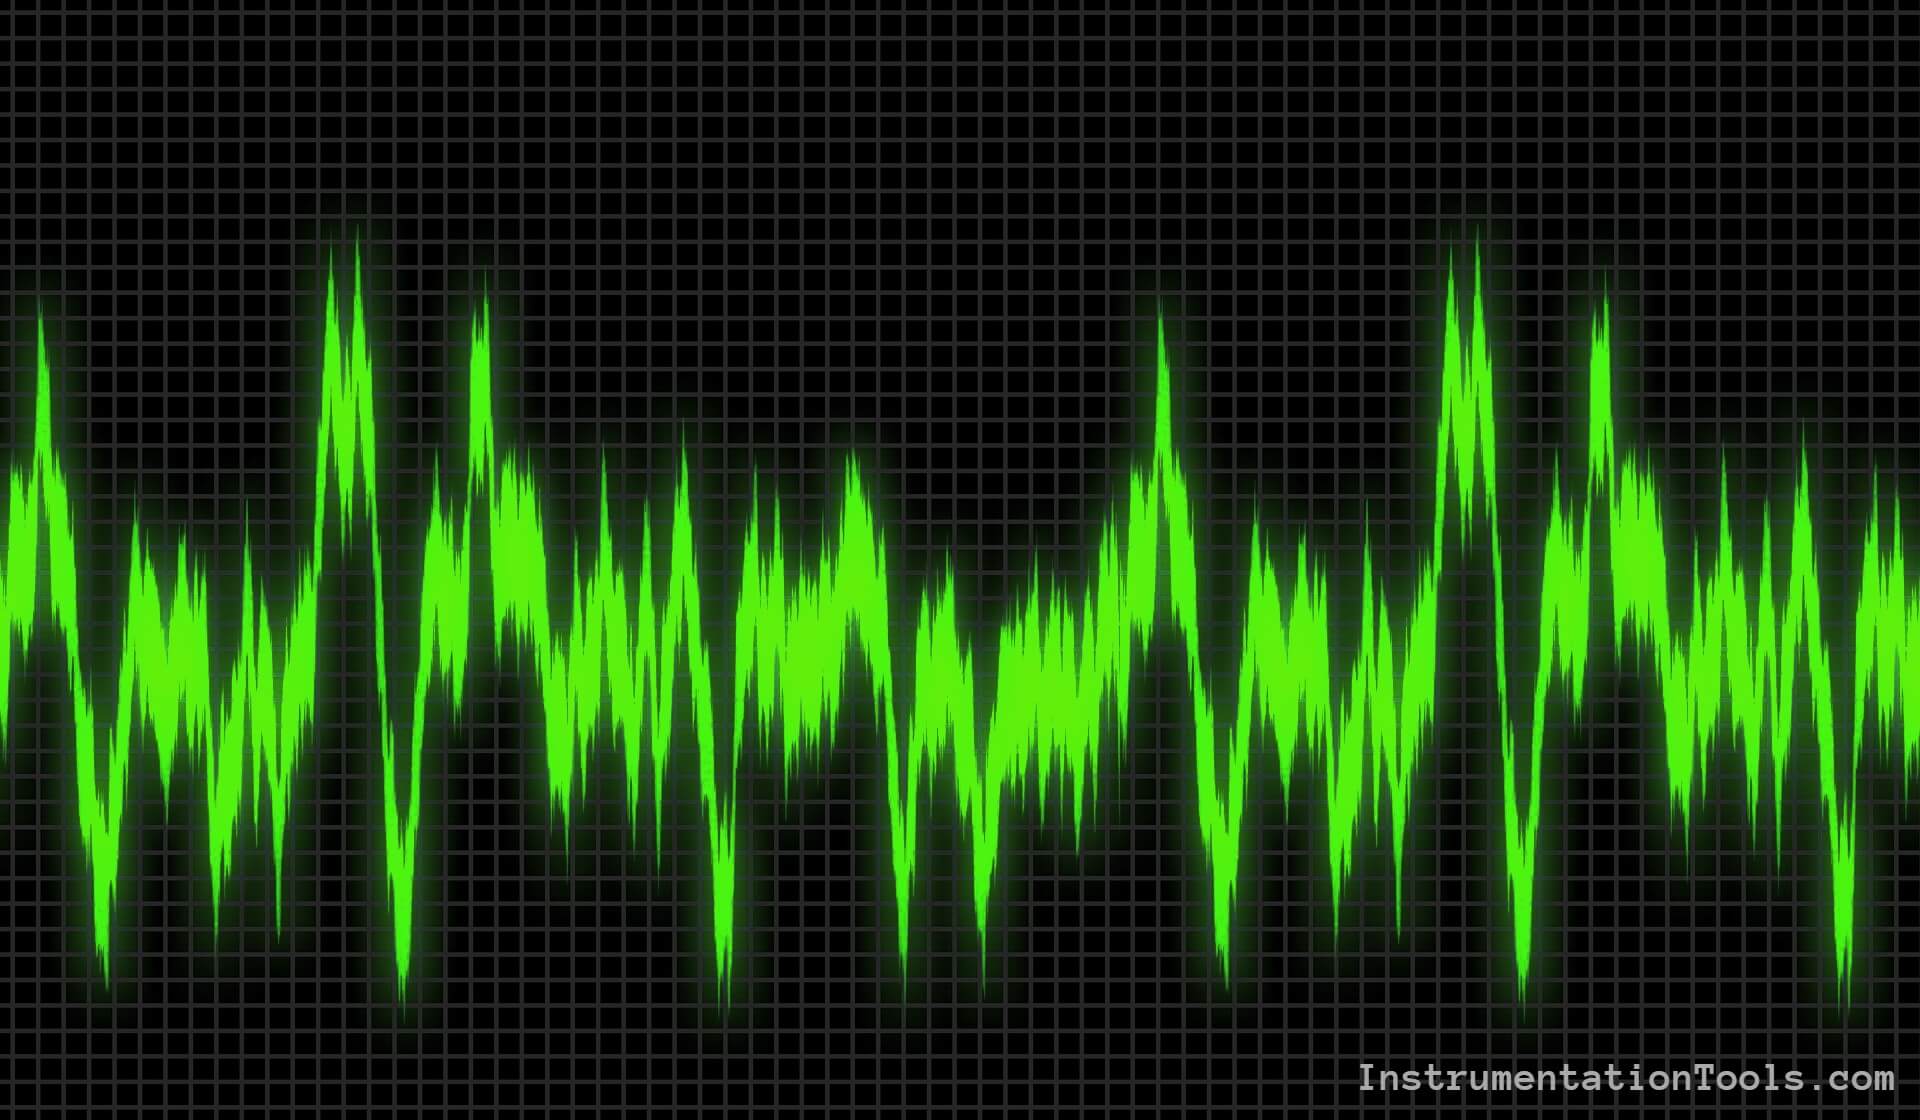 Noise in Electronic Systems & Types of Noise